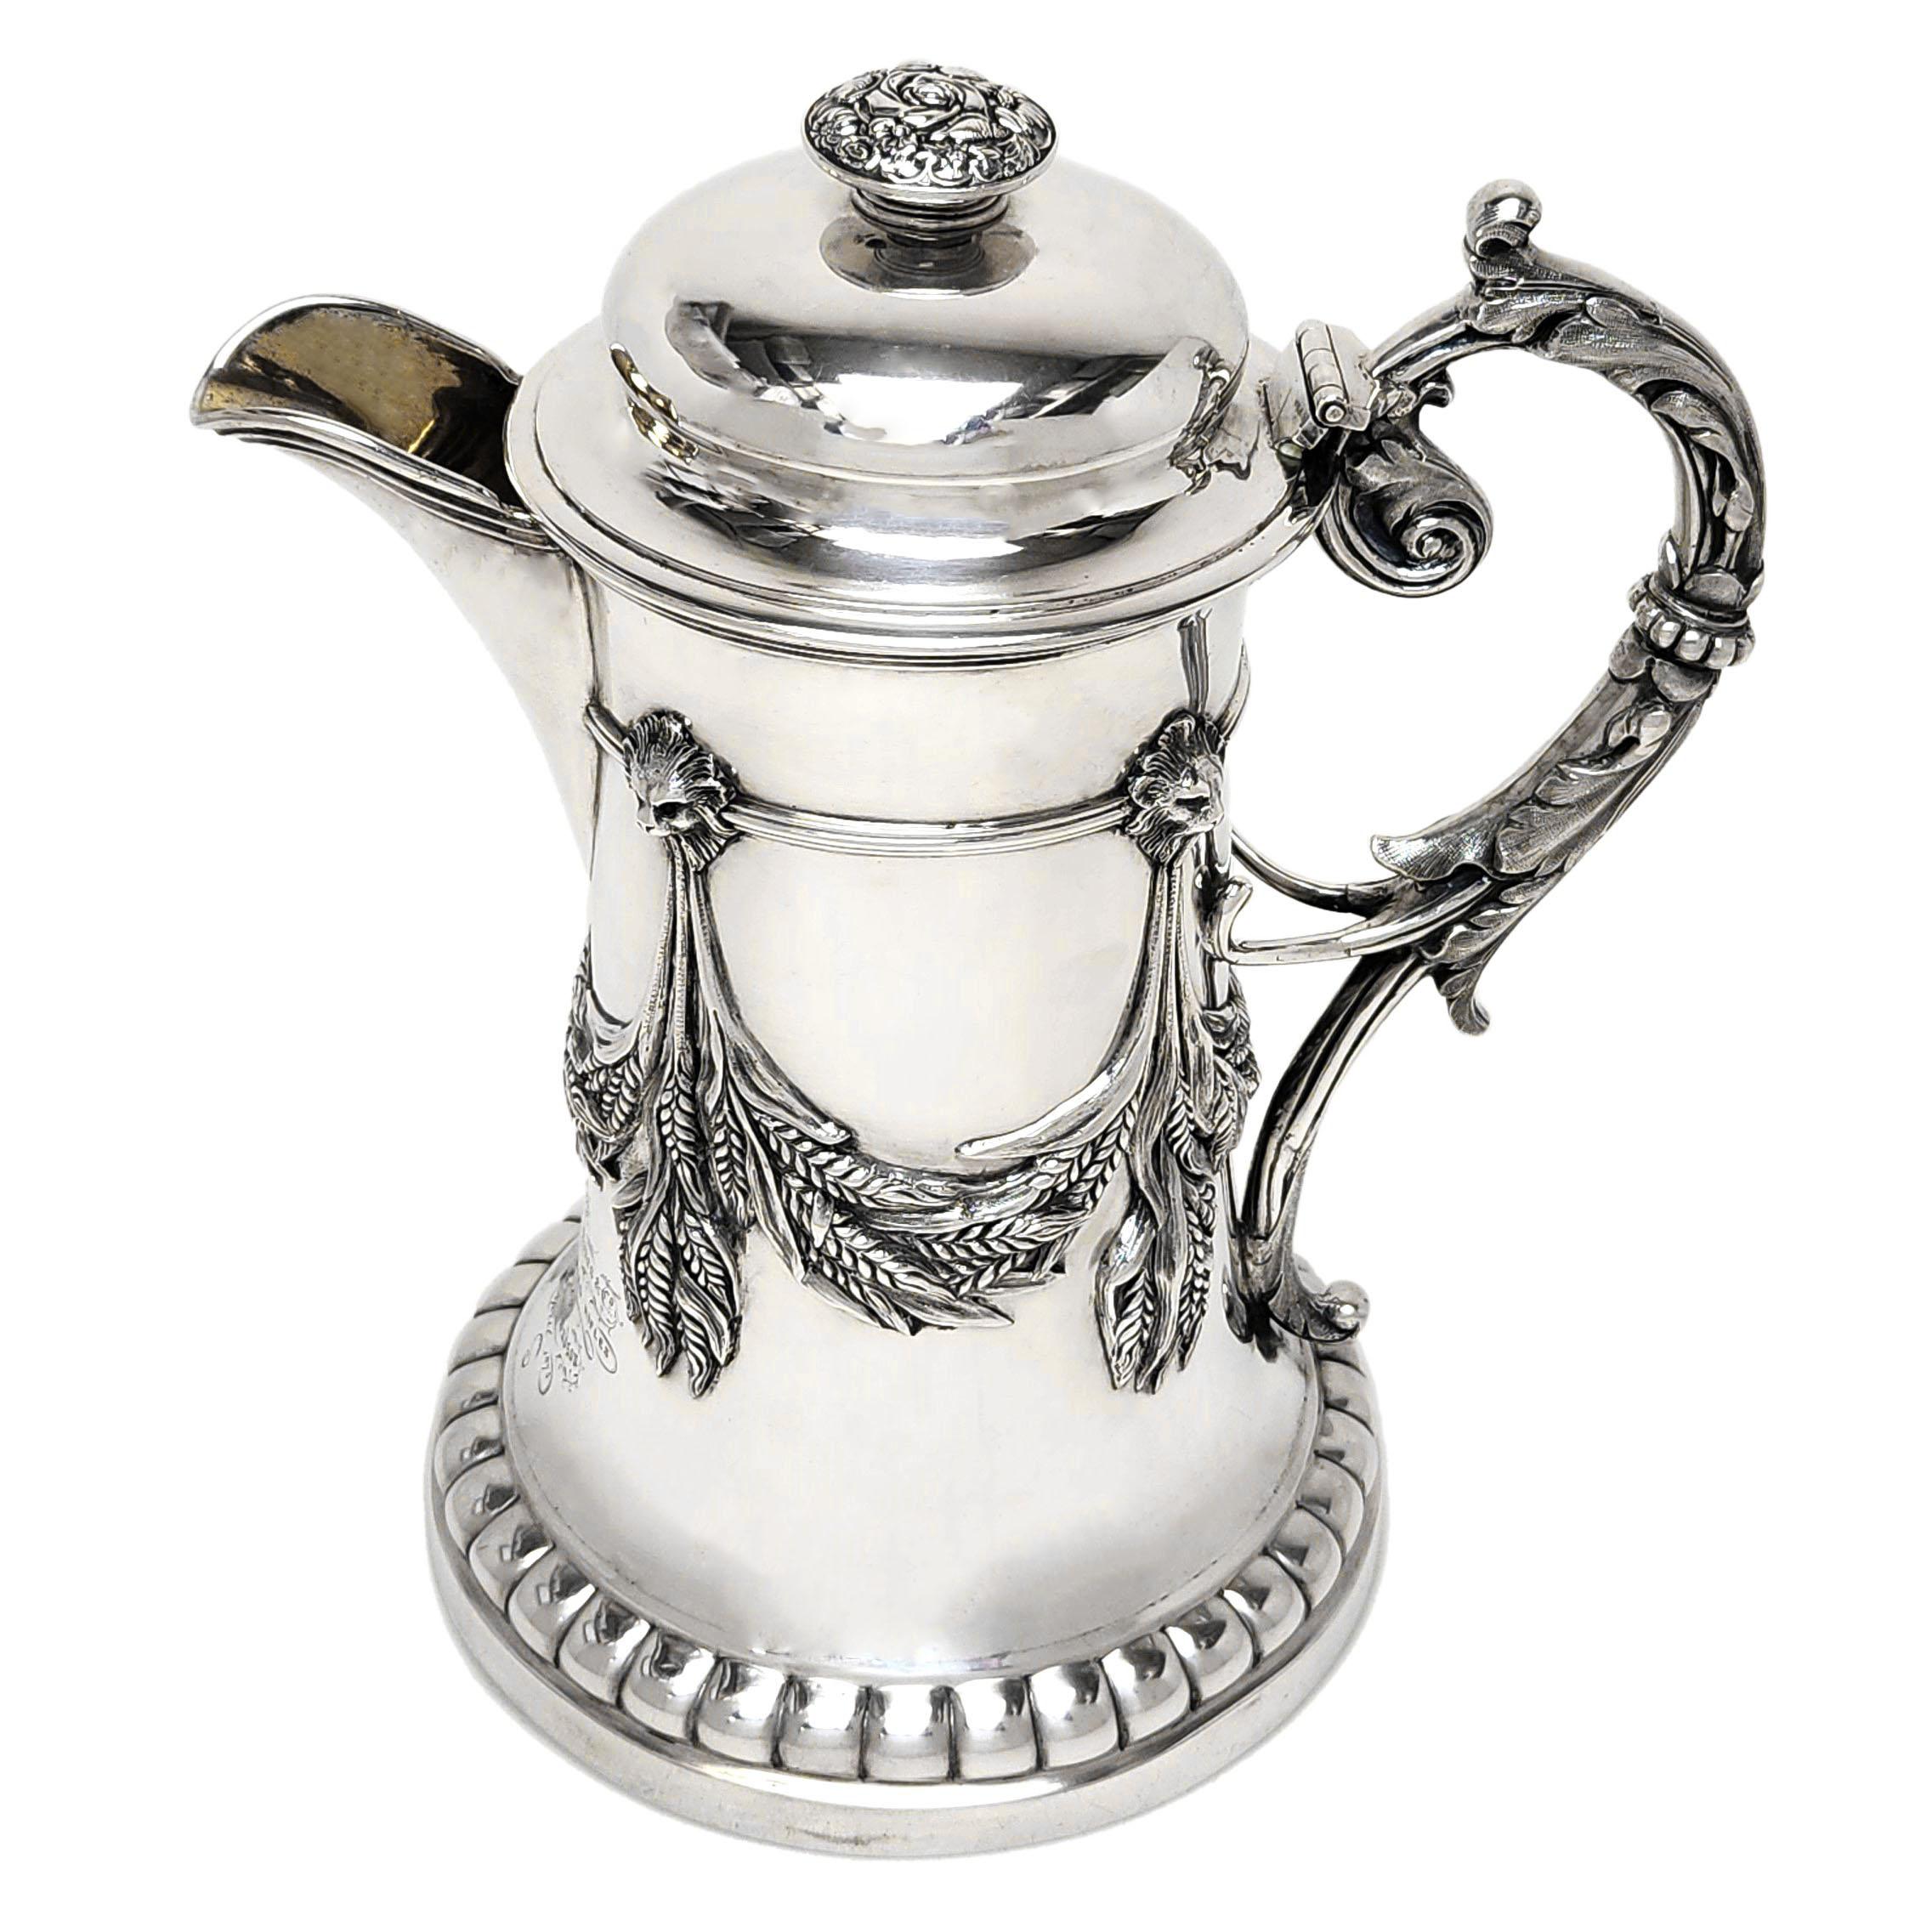 A magnificent Antique 19th Century Indian Silver Jug. This Jug has a tapered cylindrical form embellished with a cast applied band of lion heads holding impressive swags of wheat or barley which decorate the body of the jug. The Jug has an